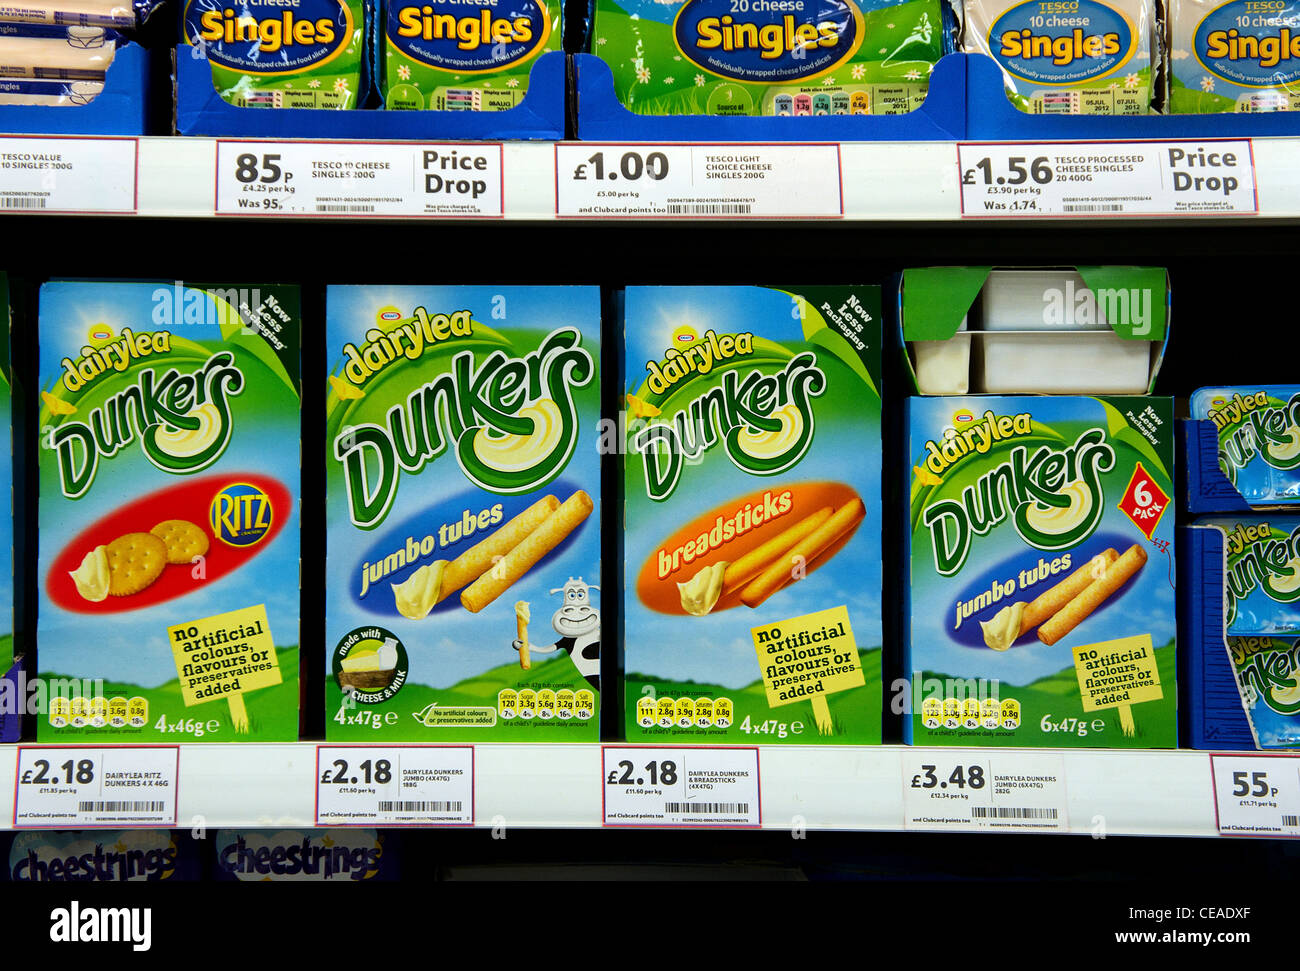 ' Dairylea Dunkers '  processed cheese snacks Stock Photo